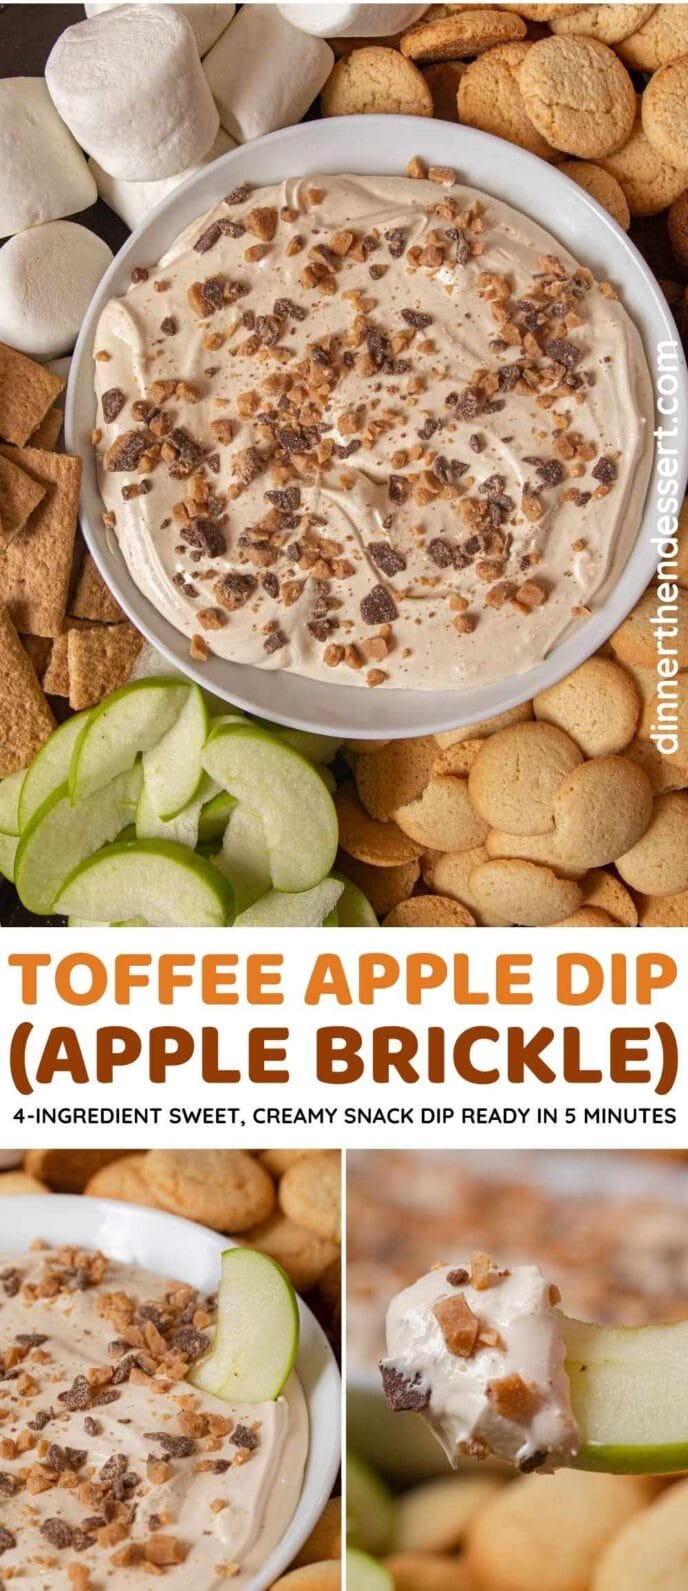 Toffee Apple Brickle collage